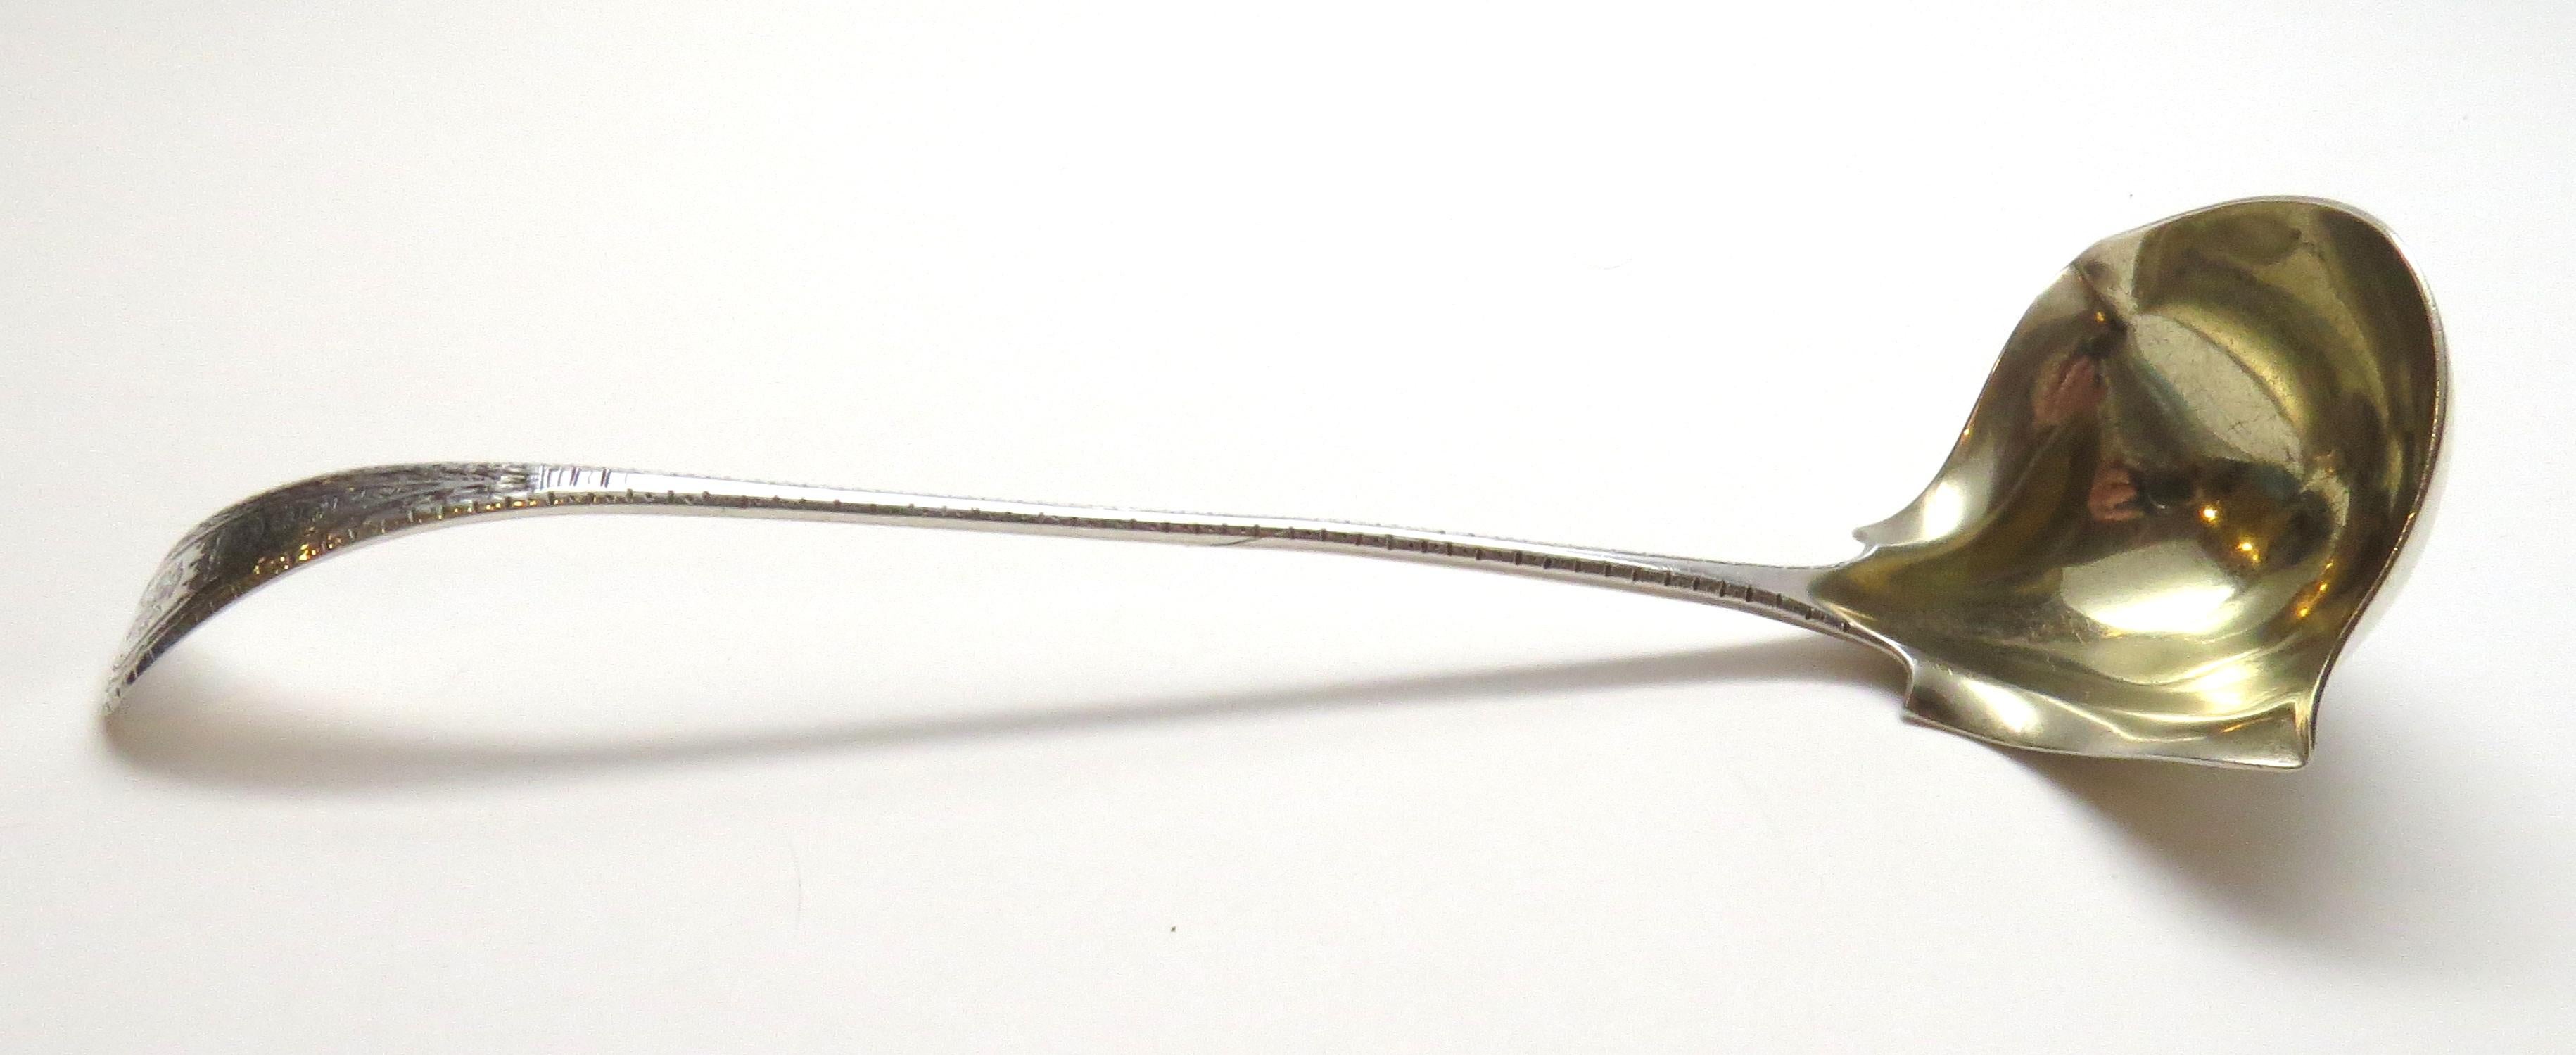 Tiffany & Co. King William engraved sterling silver double-lipped cream ladle. 
This is a lovely King William engraved sterling silver and gold washed double lipped cream ladle designed by Tiffany & Co. Measurement: Approximate 9 1/4 inches in